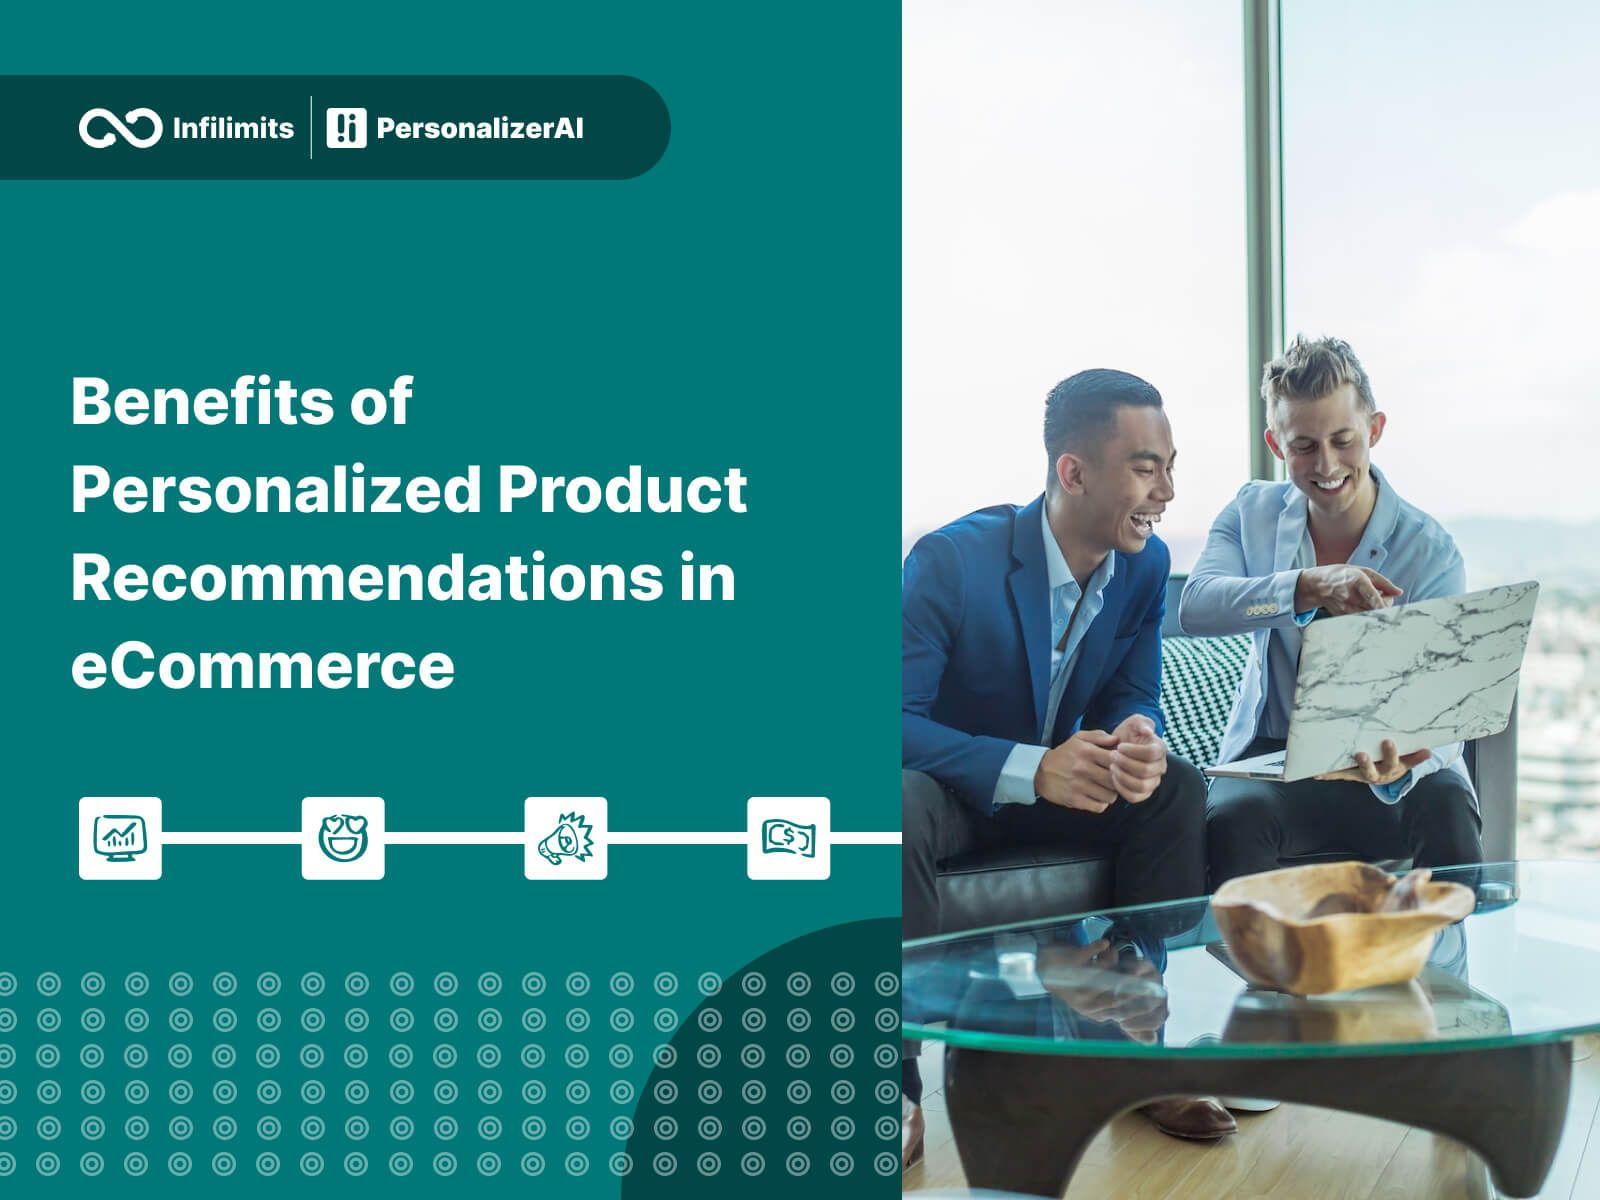 Benefits of Personalized Product Recommendations in eCommerce